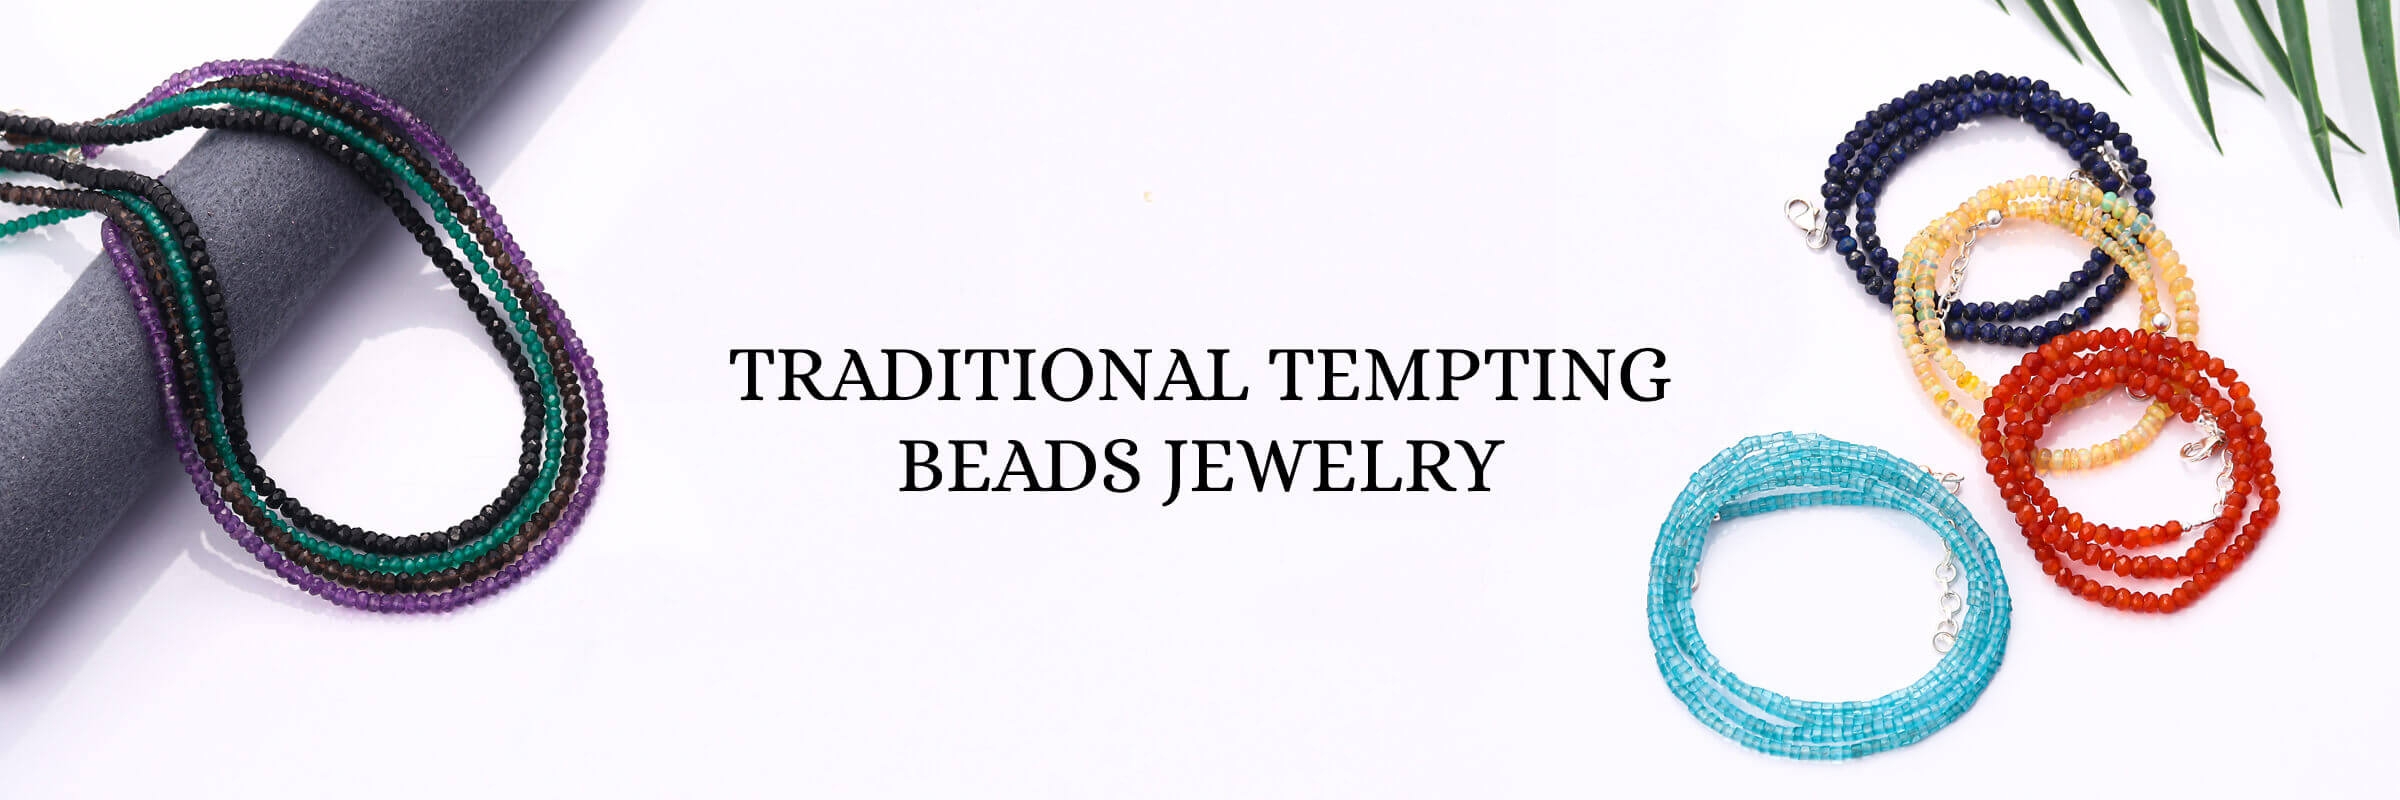 Tempting Beads Jewelry at Rananjay Exports